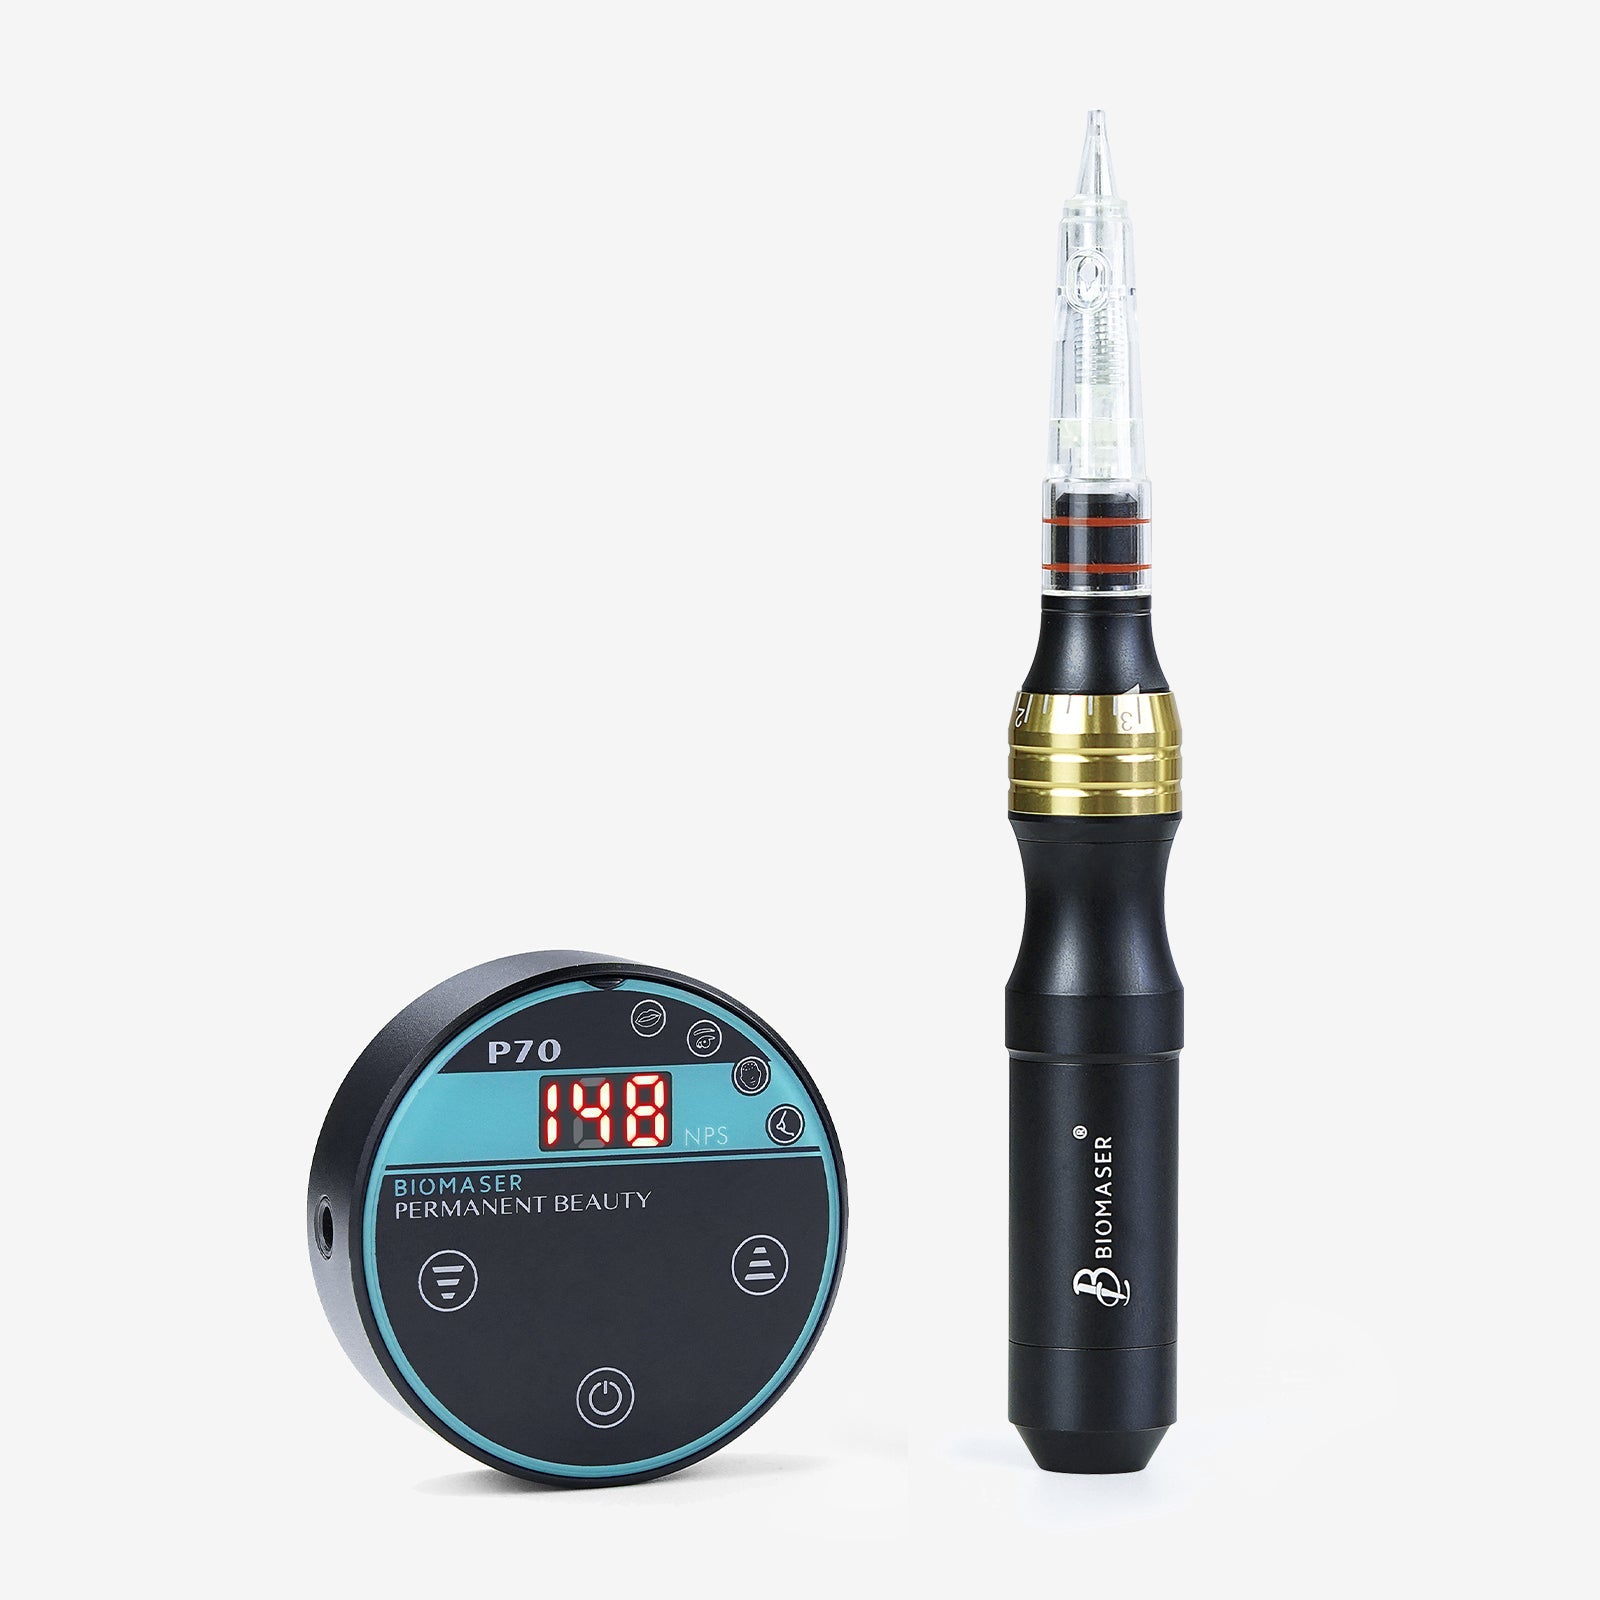 Biomaser P70 Set includes Needle Pigment Pen and Power Supply